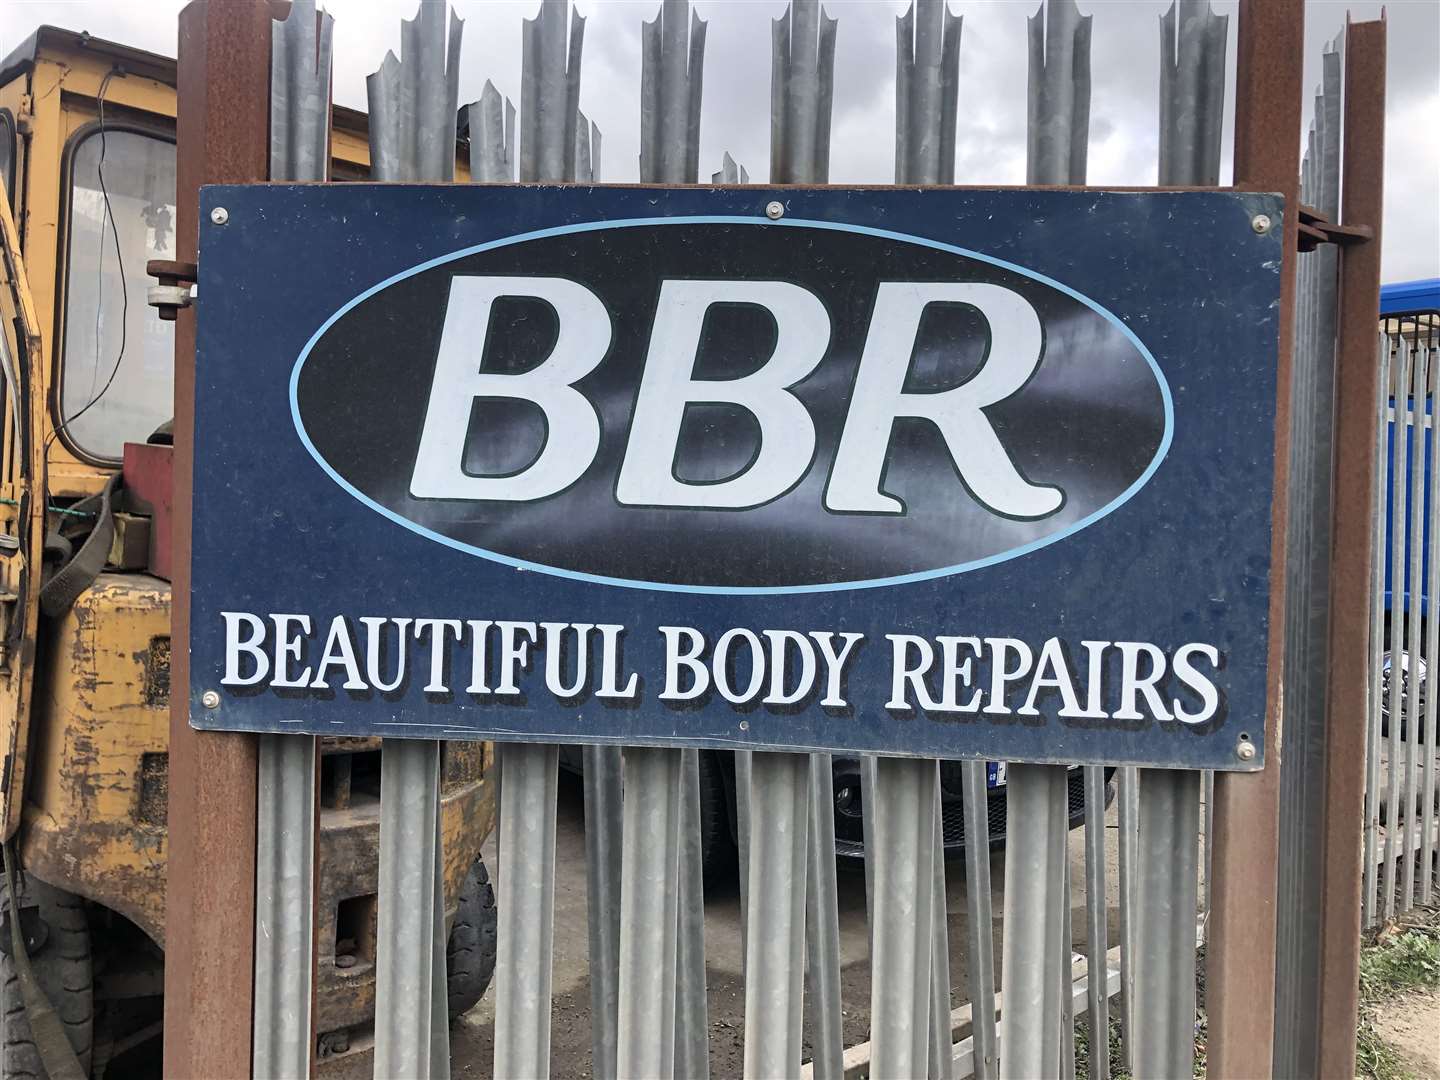 Beautiful Body Repairs has had to close today